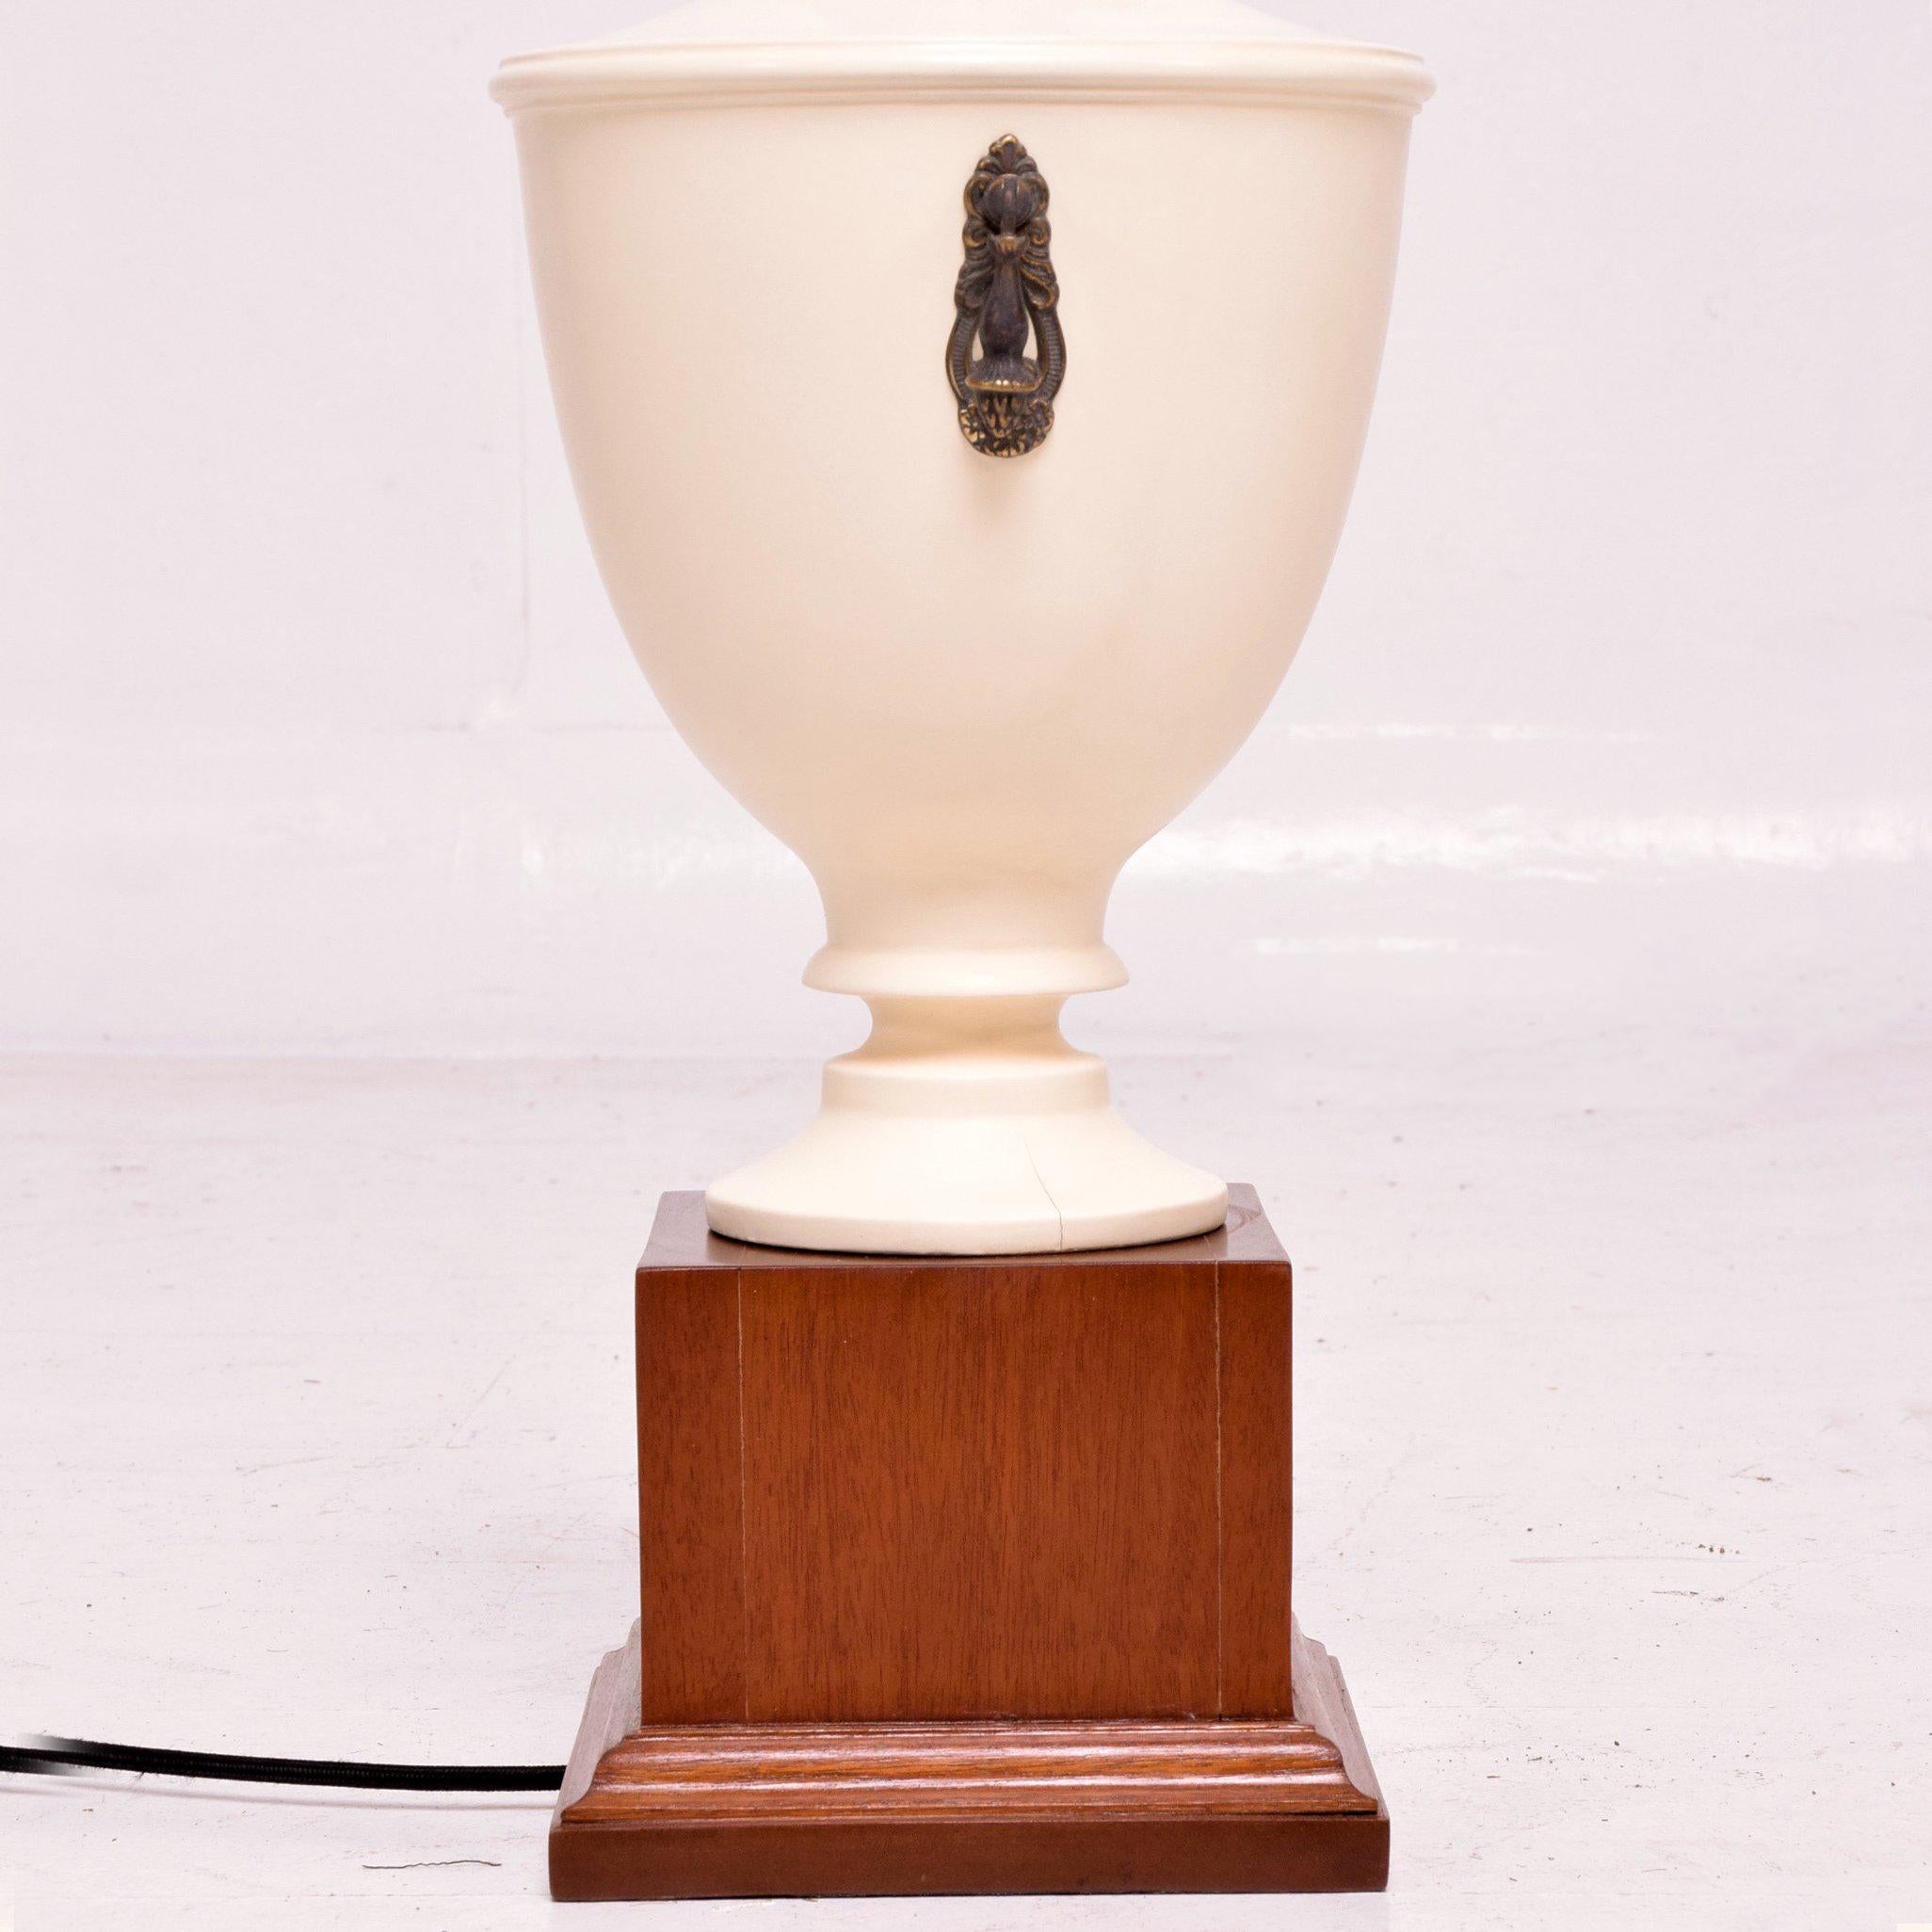 For your consideration a pair of neoclassical table lamps. Urn shape with bronze and brass accents details.

The urn is made of solid mahogany wood, Mounted in a wood pedestal base.

Rewired, restored. No shade included. 
Mexico, circa